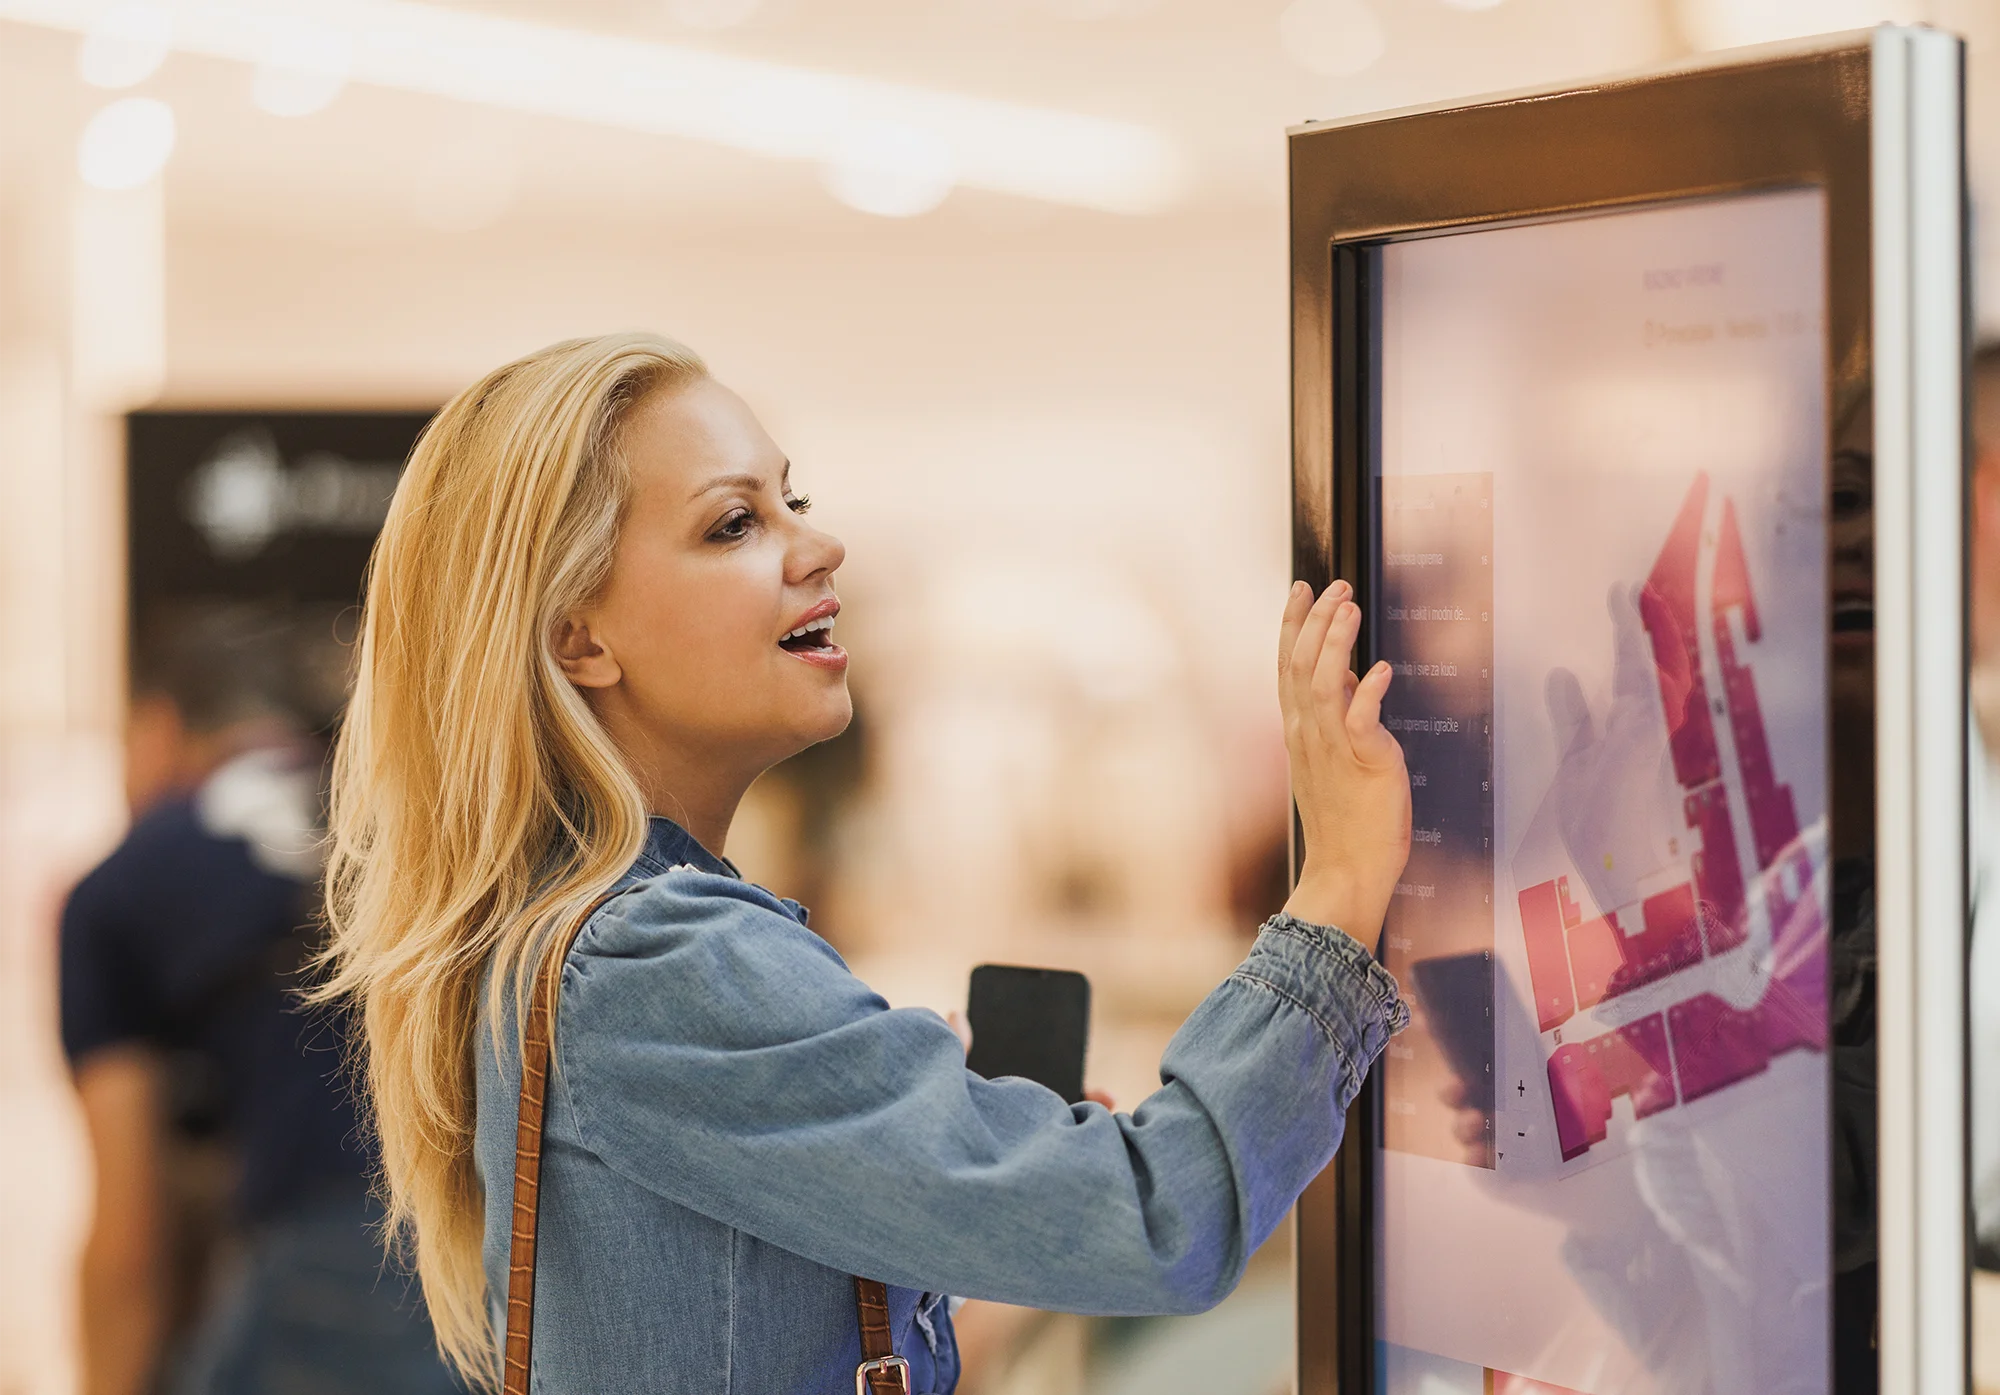 Video Wall Display: Does Your Business Need One?